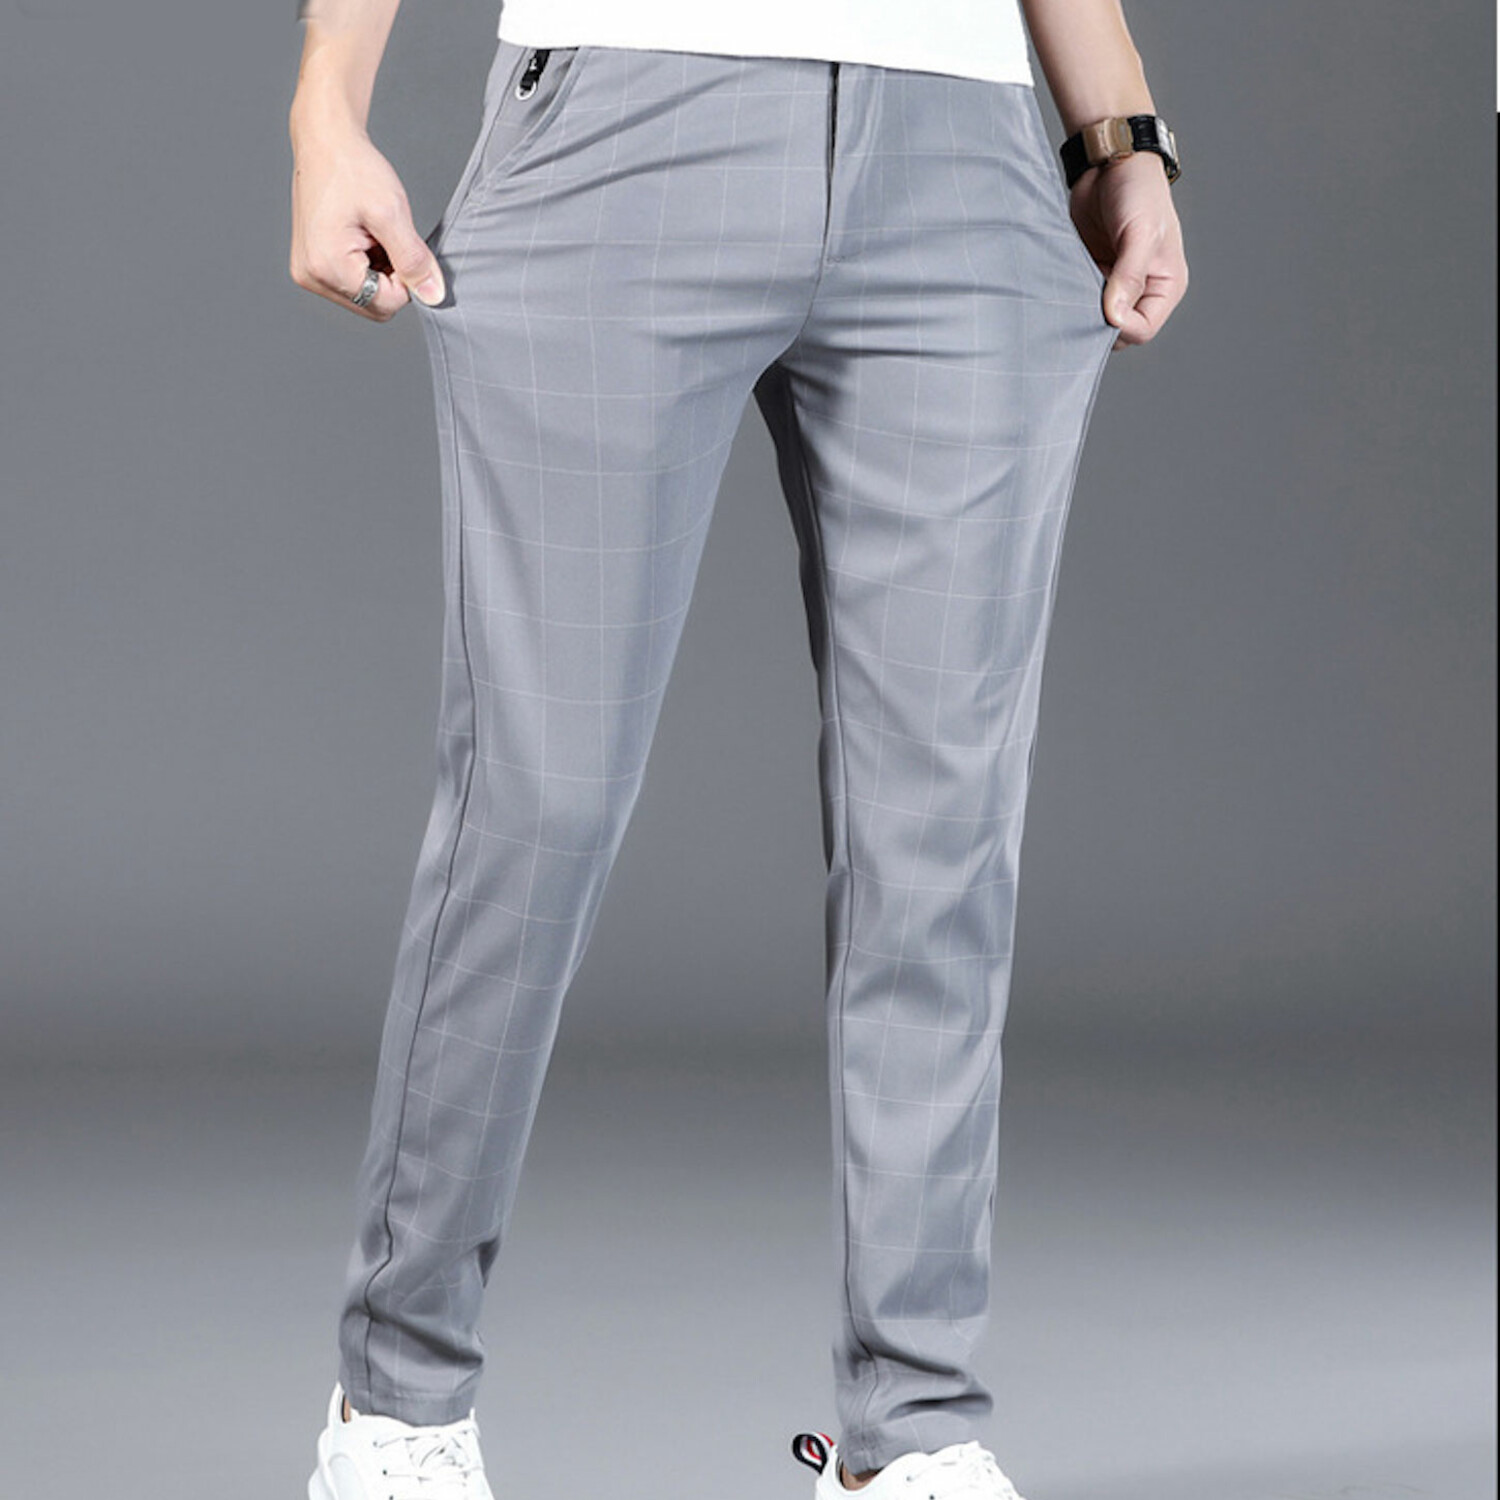 Wide Grid Print Slim Fit Pants // Light Gray (38) - Amedeo Exclusive ...